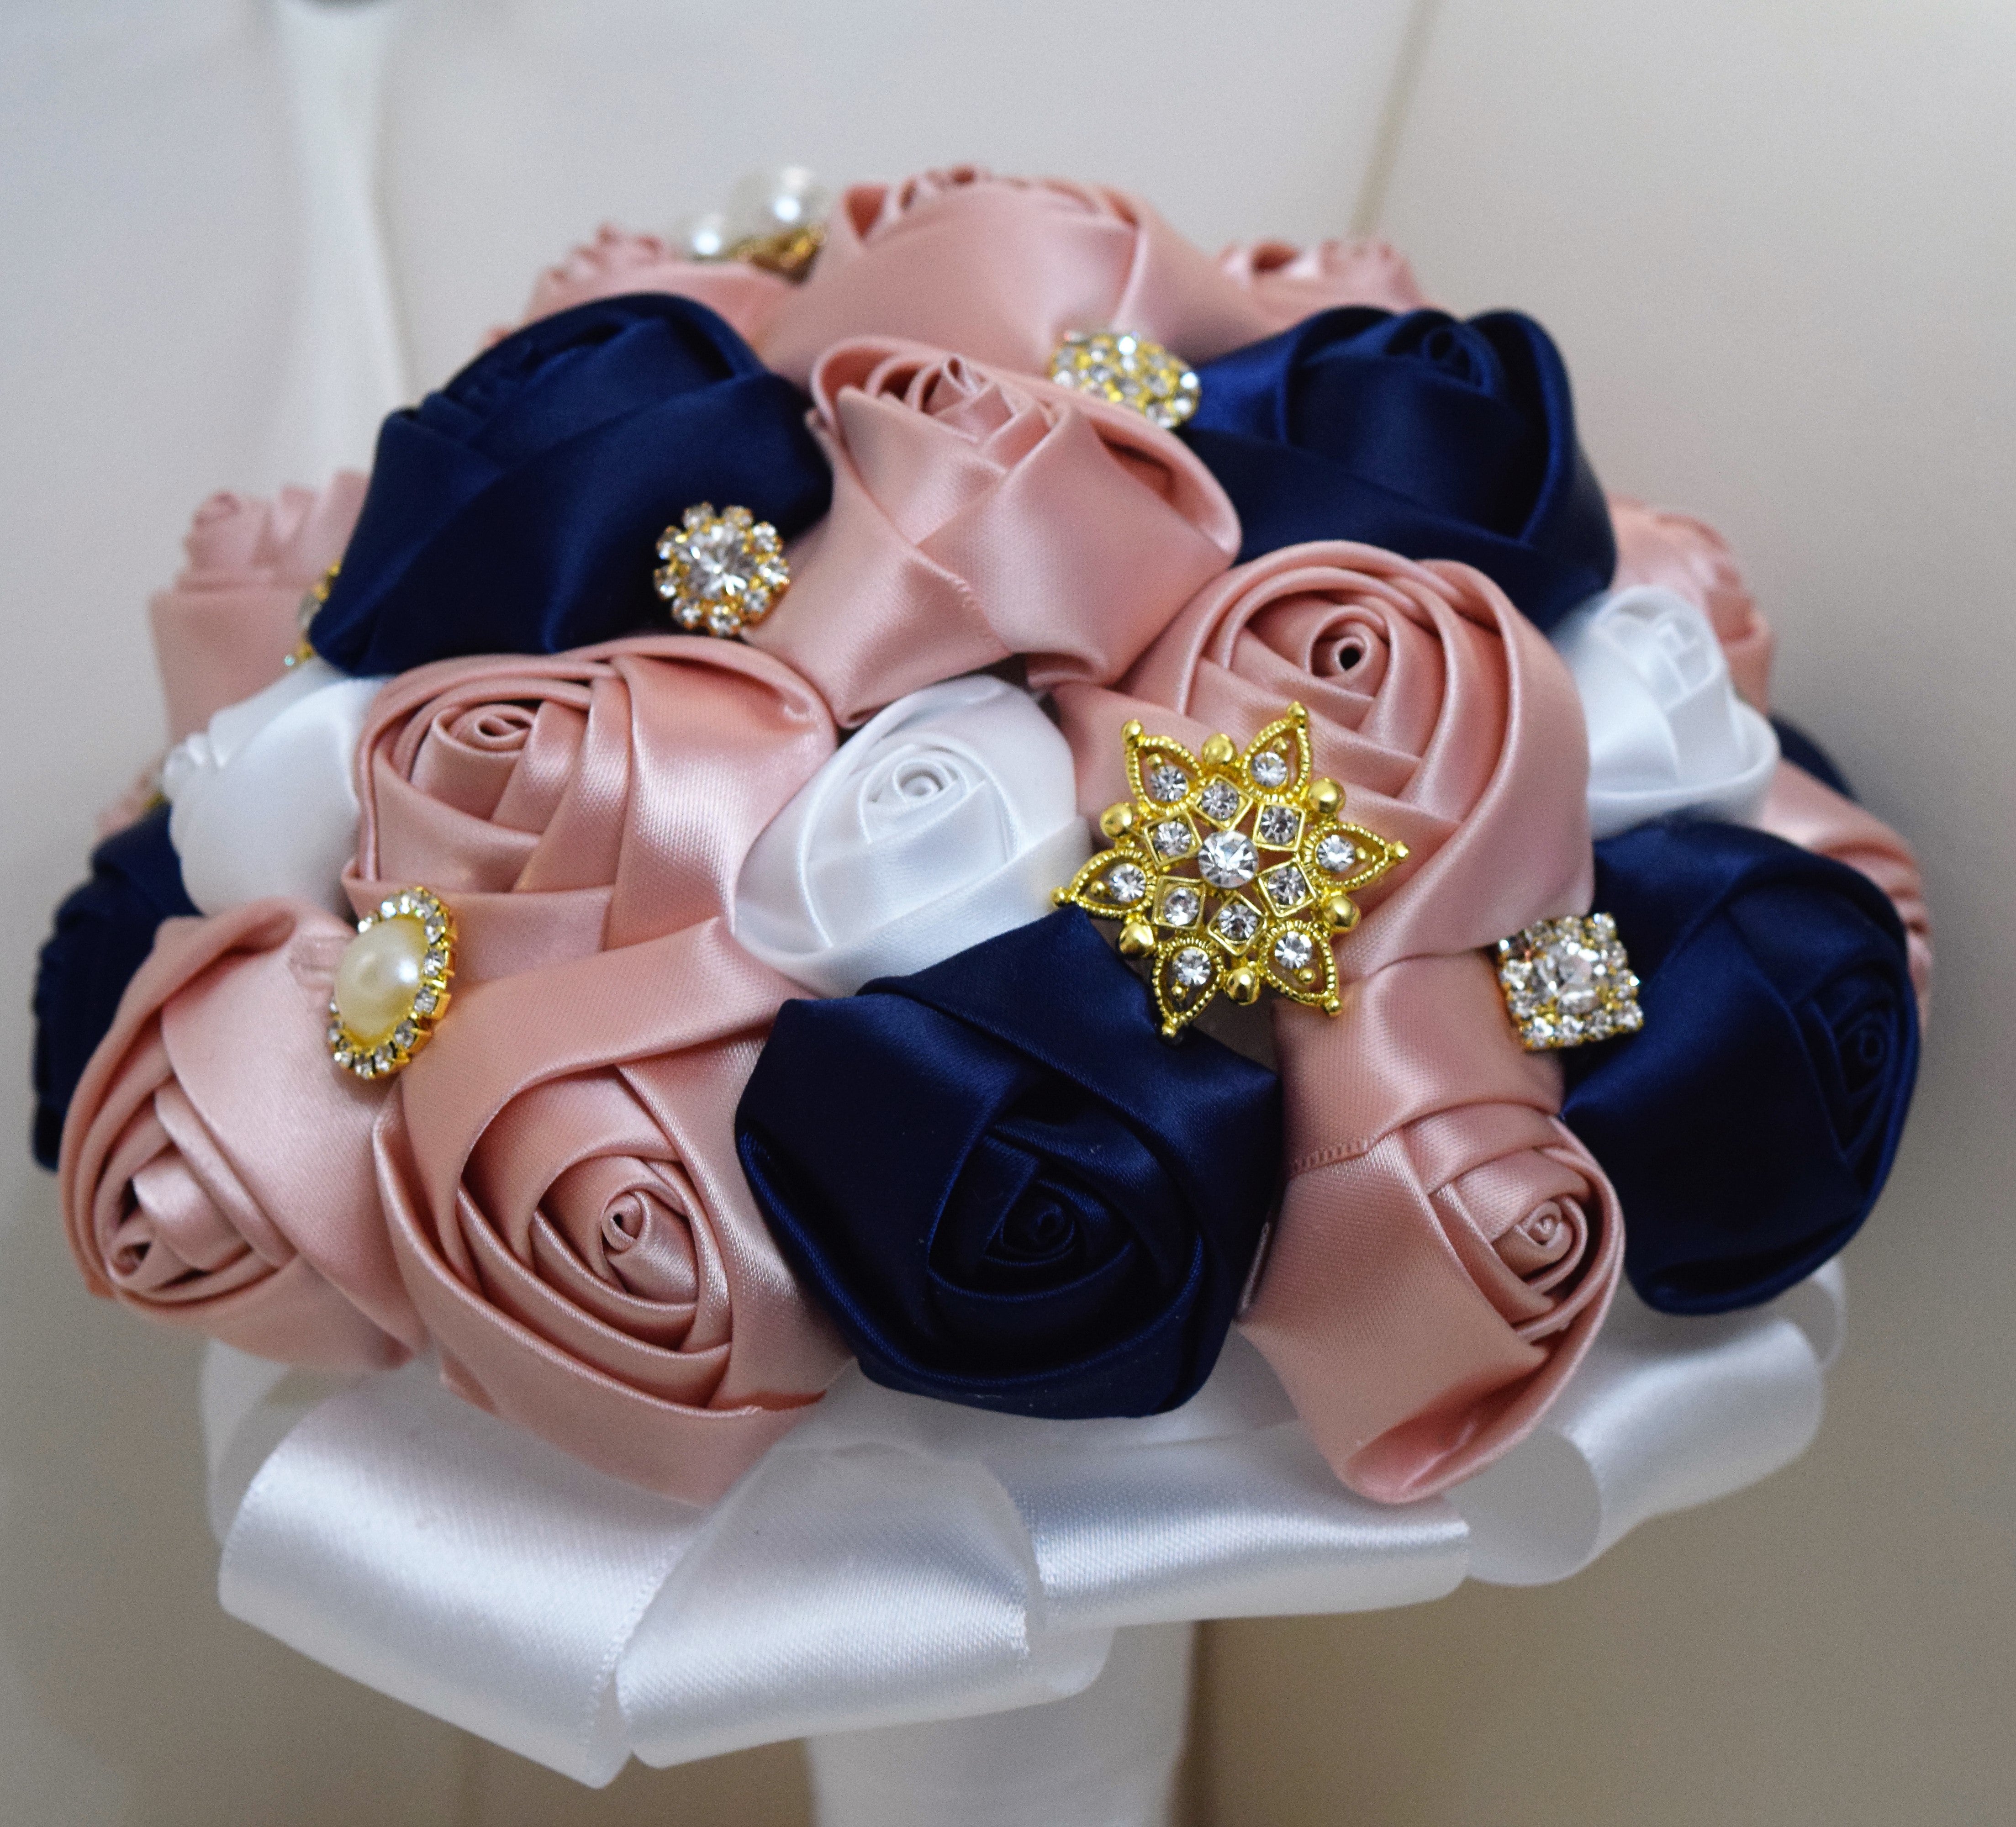 WEDDING CAKE PACK PEARL BROOCH WITH RIBBON & PEARLS BLUES